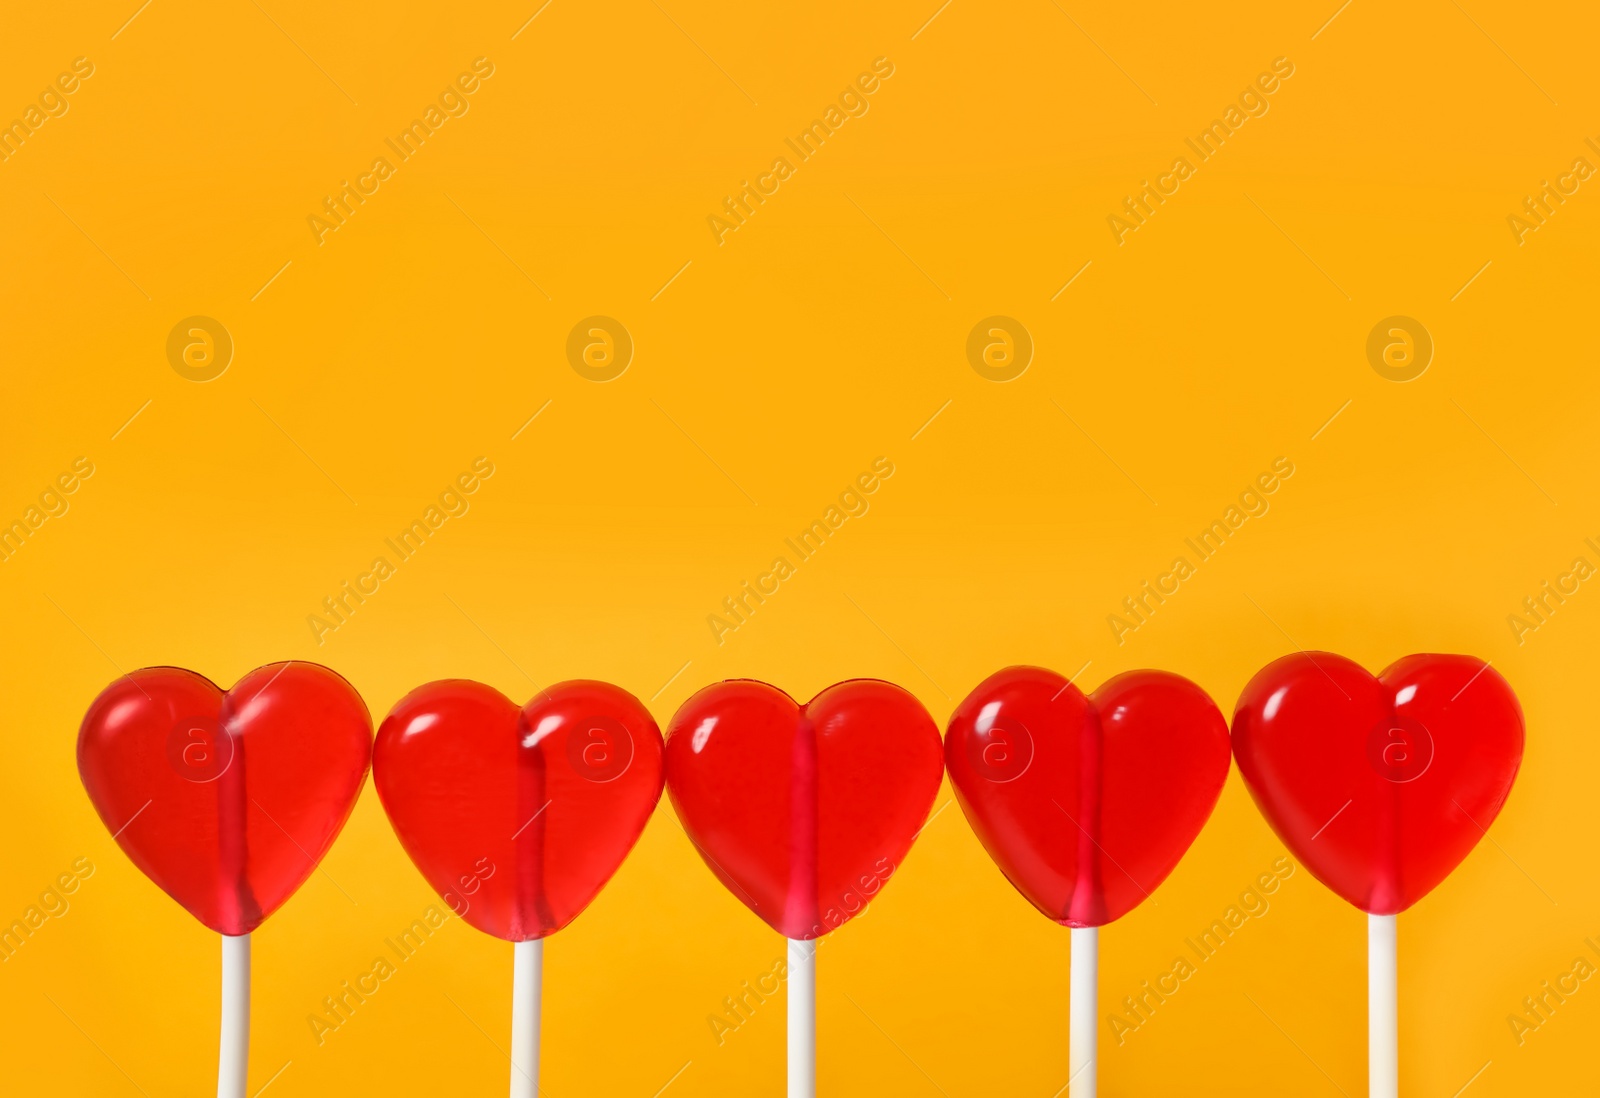 Photo of Sweet heart shaped lollipops on orange background, closeup view with space for text. Valentine's day celebration